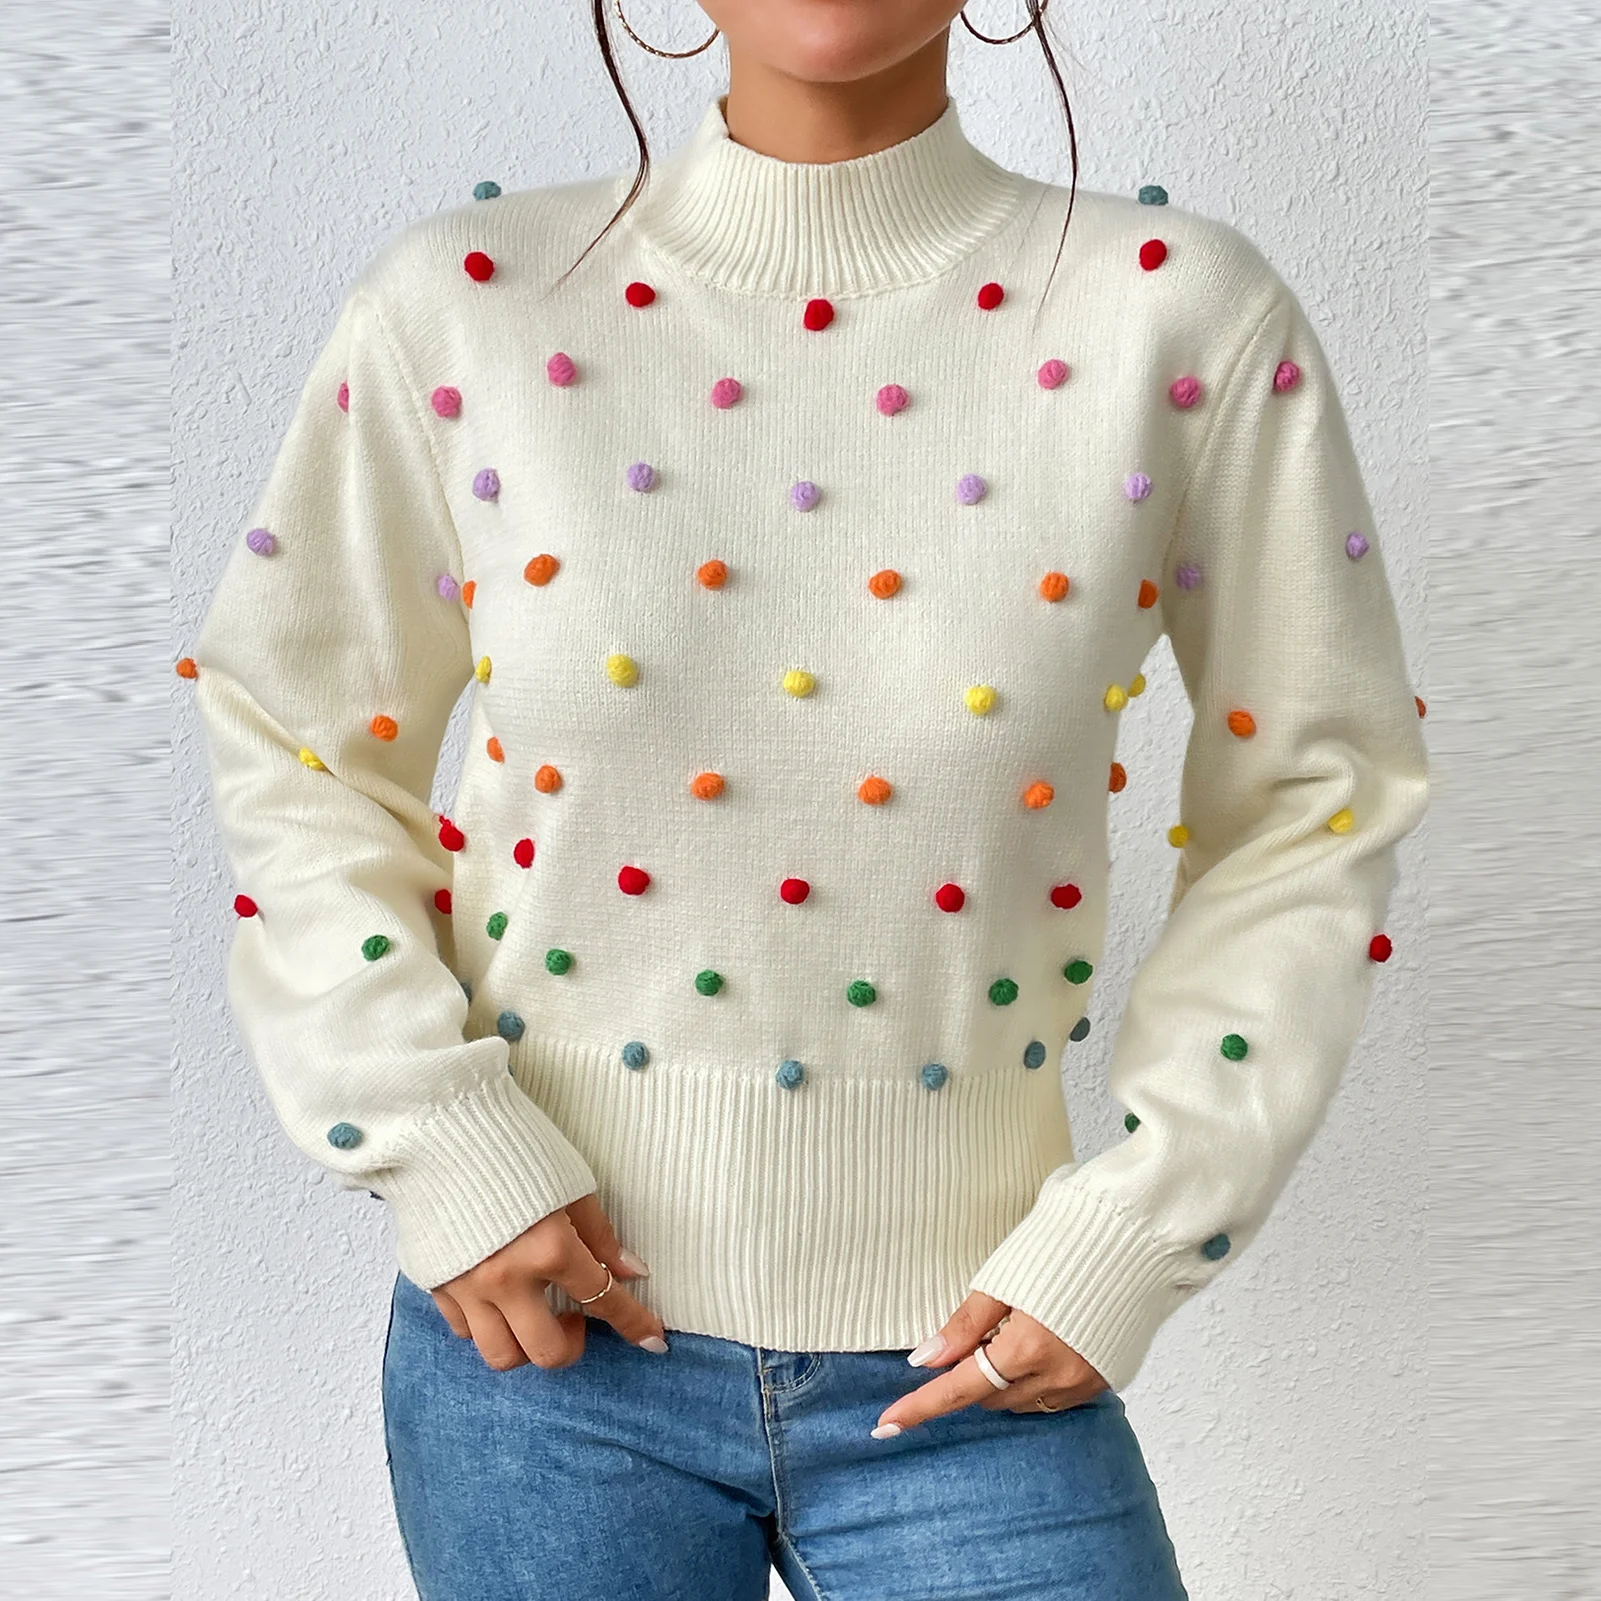 

Sweater Pullover for Women's Basic Rainbow Pom Pom Jumper Vintage Knitted Crew Neck Long Sleeve Autumn Winter Outdoor Wear